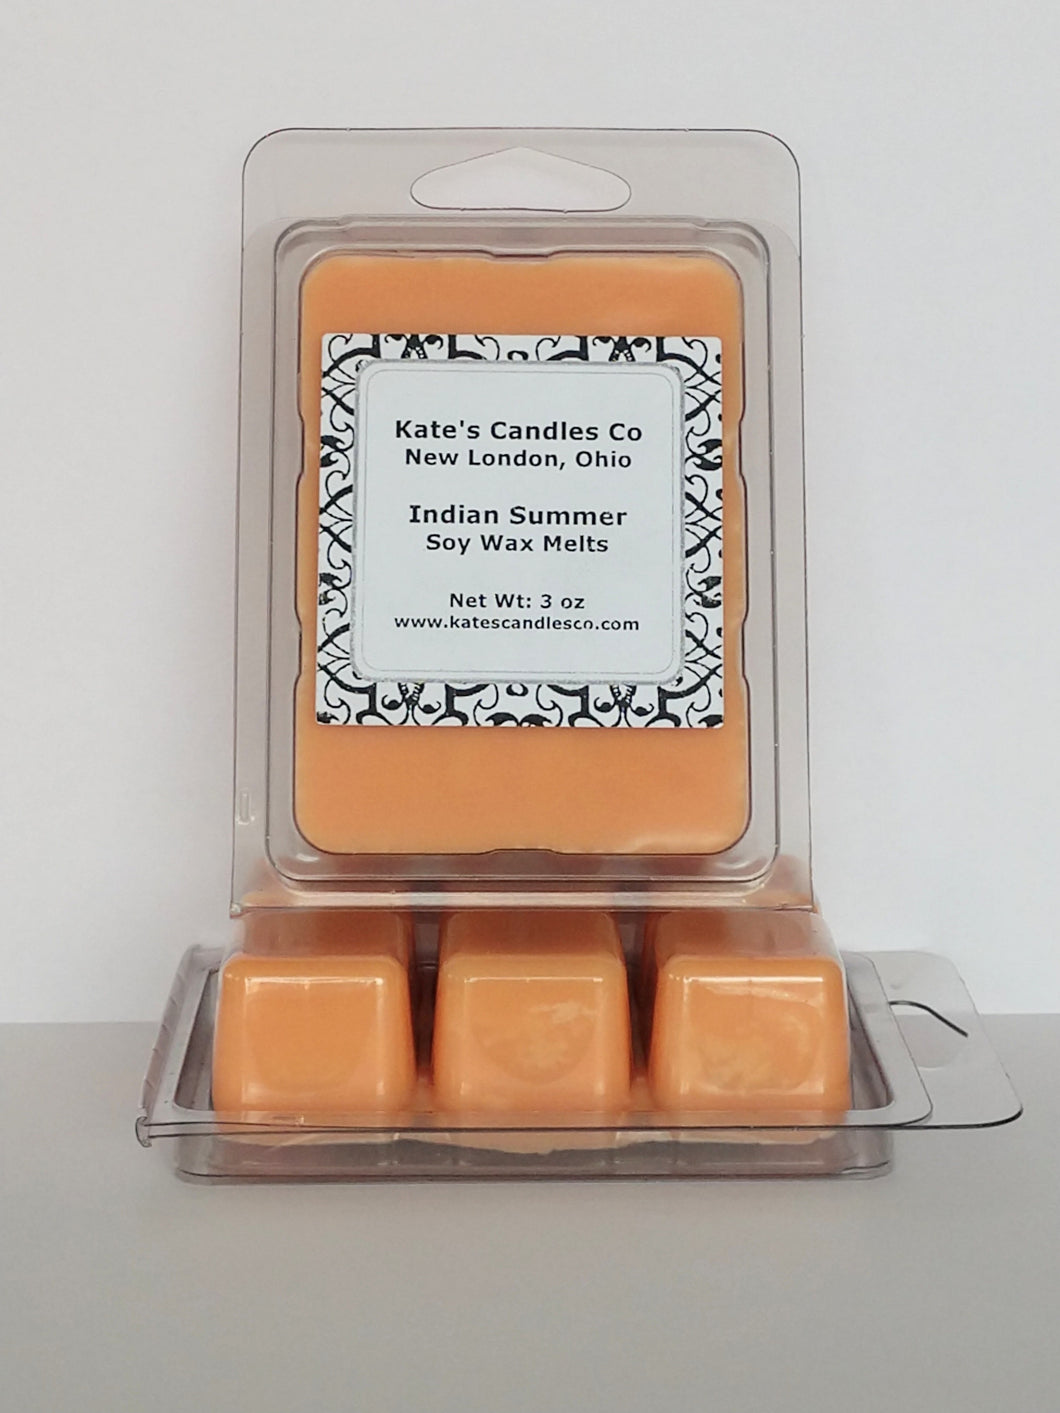 Indian Summer Soy Wax Melts - Kate's Candles Co.